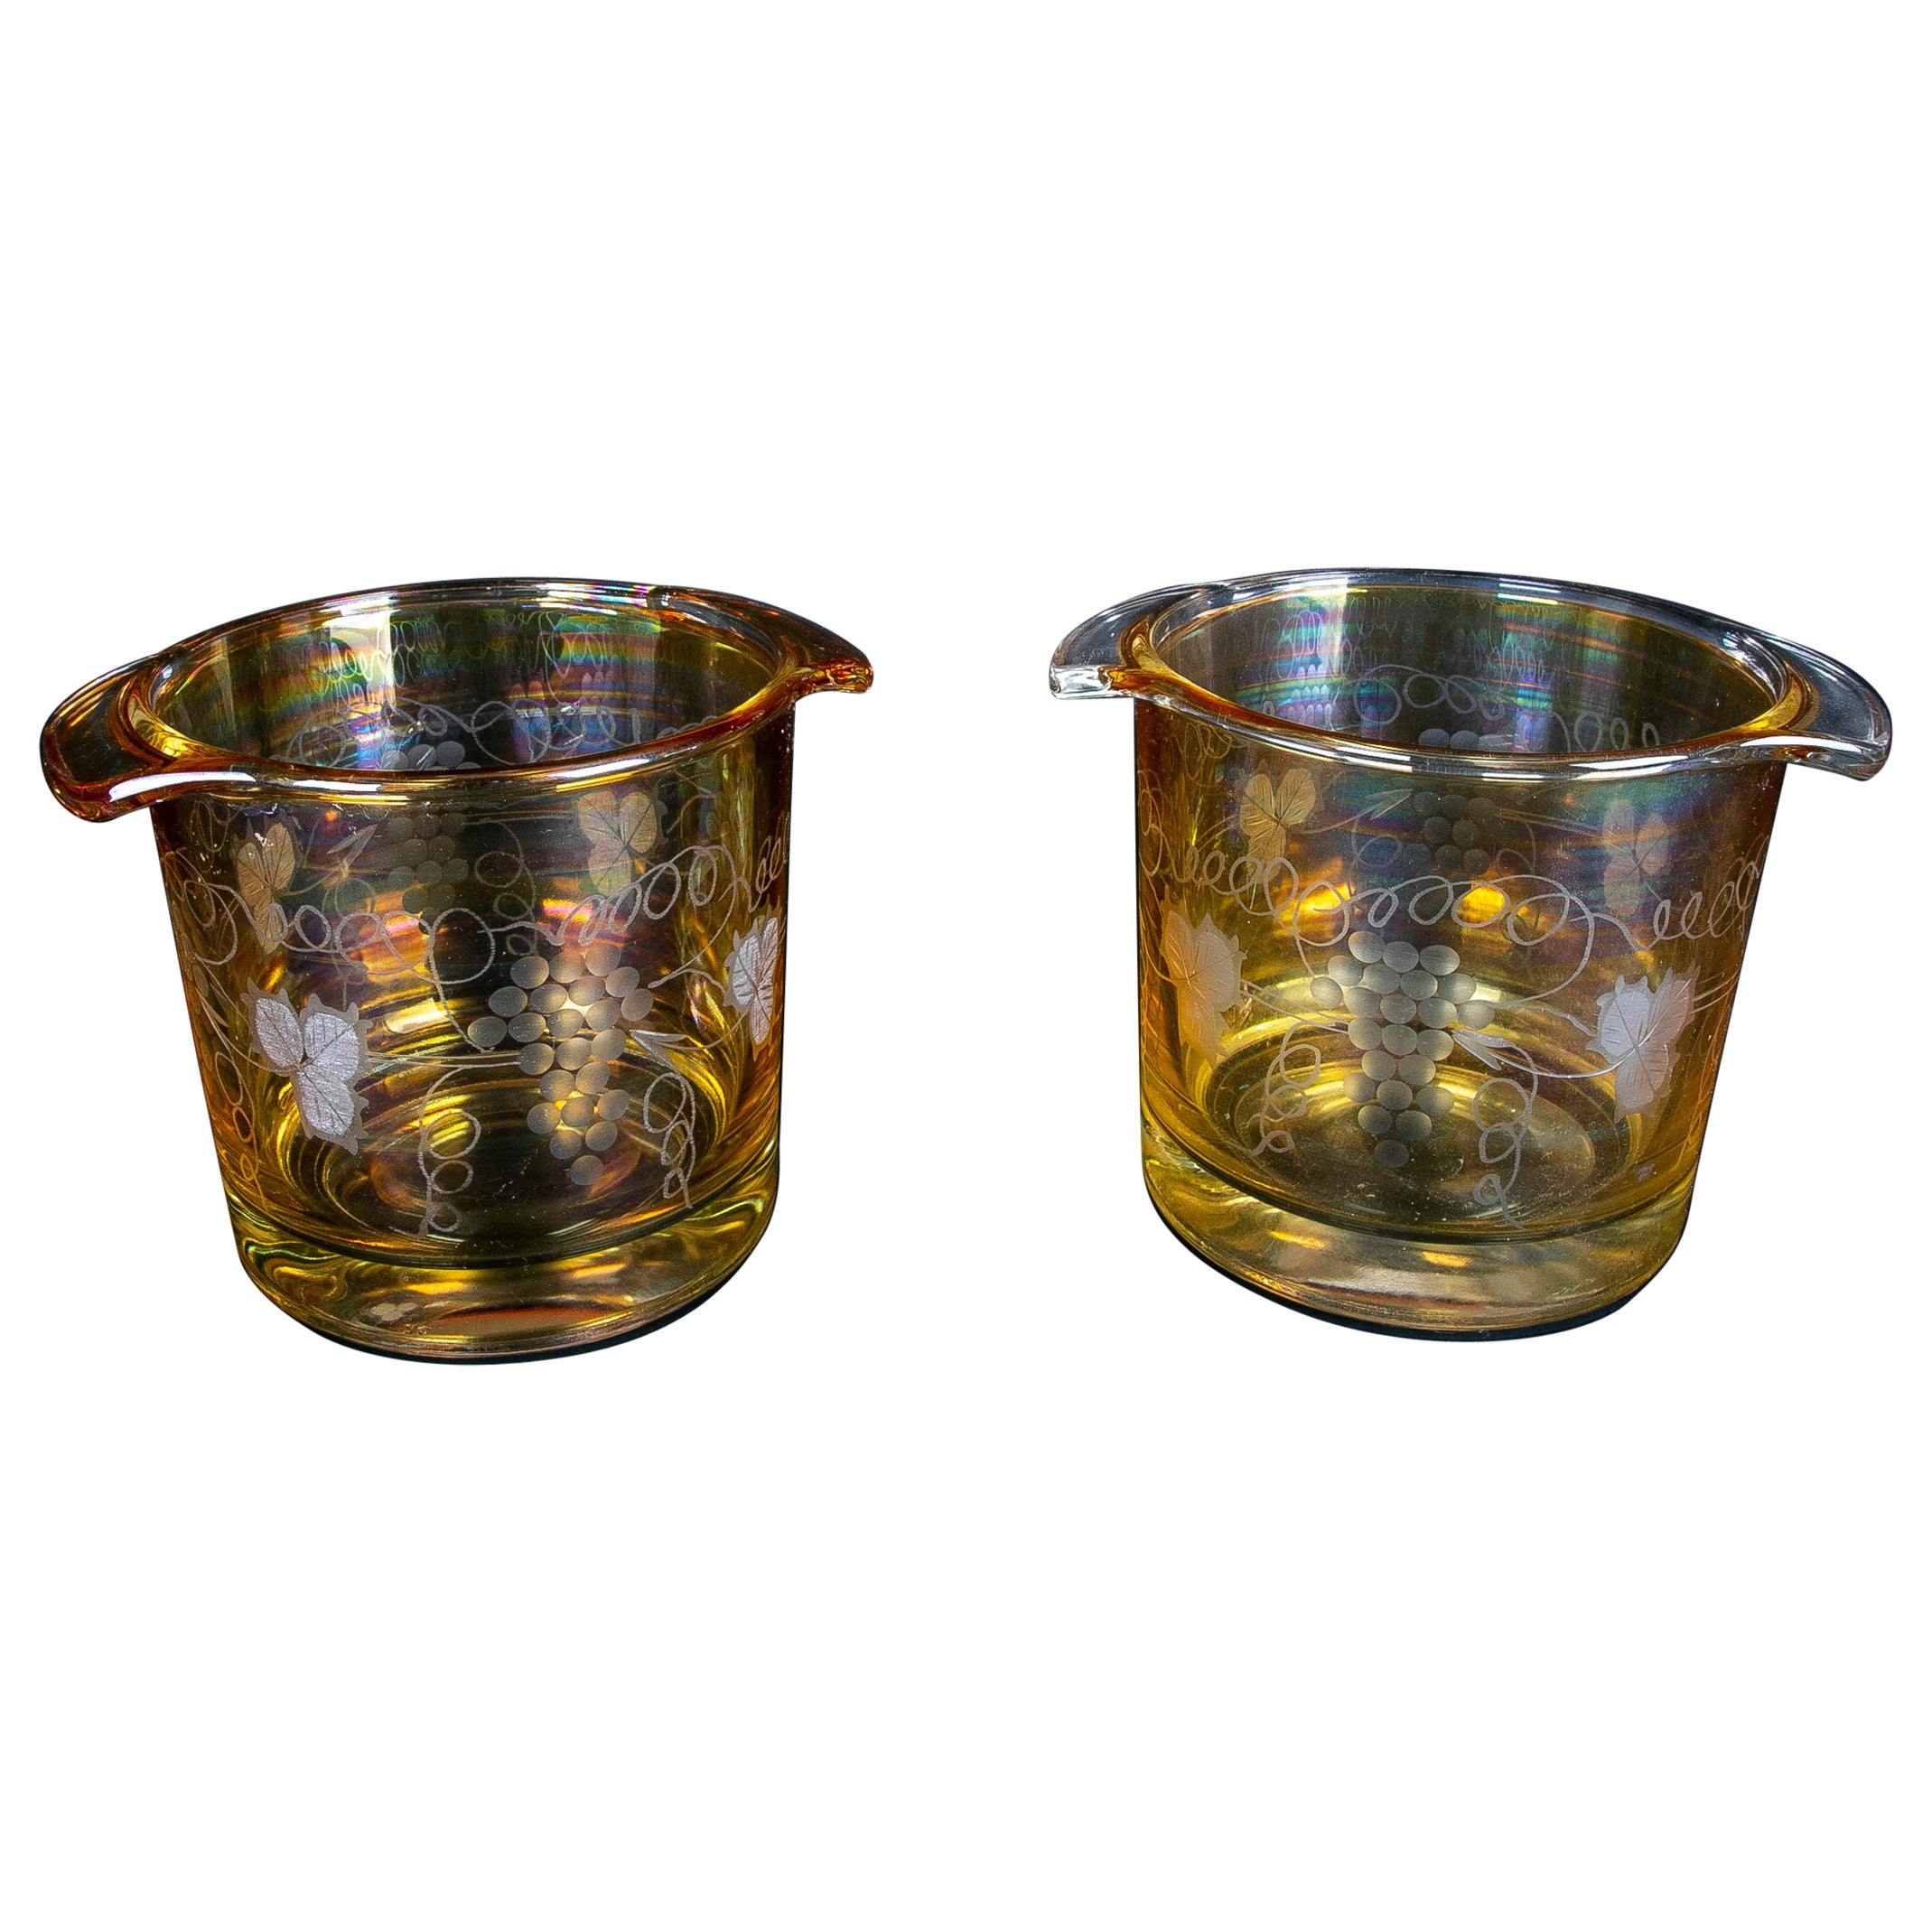 Italian Pair of Glass Vessels with Grapes Carved Decoration 